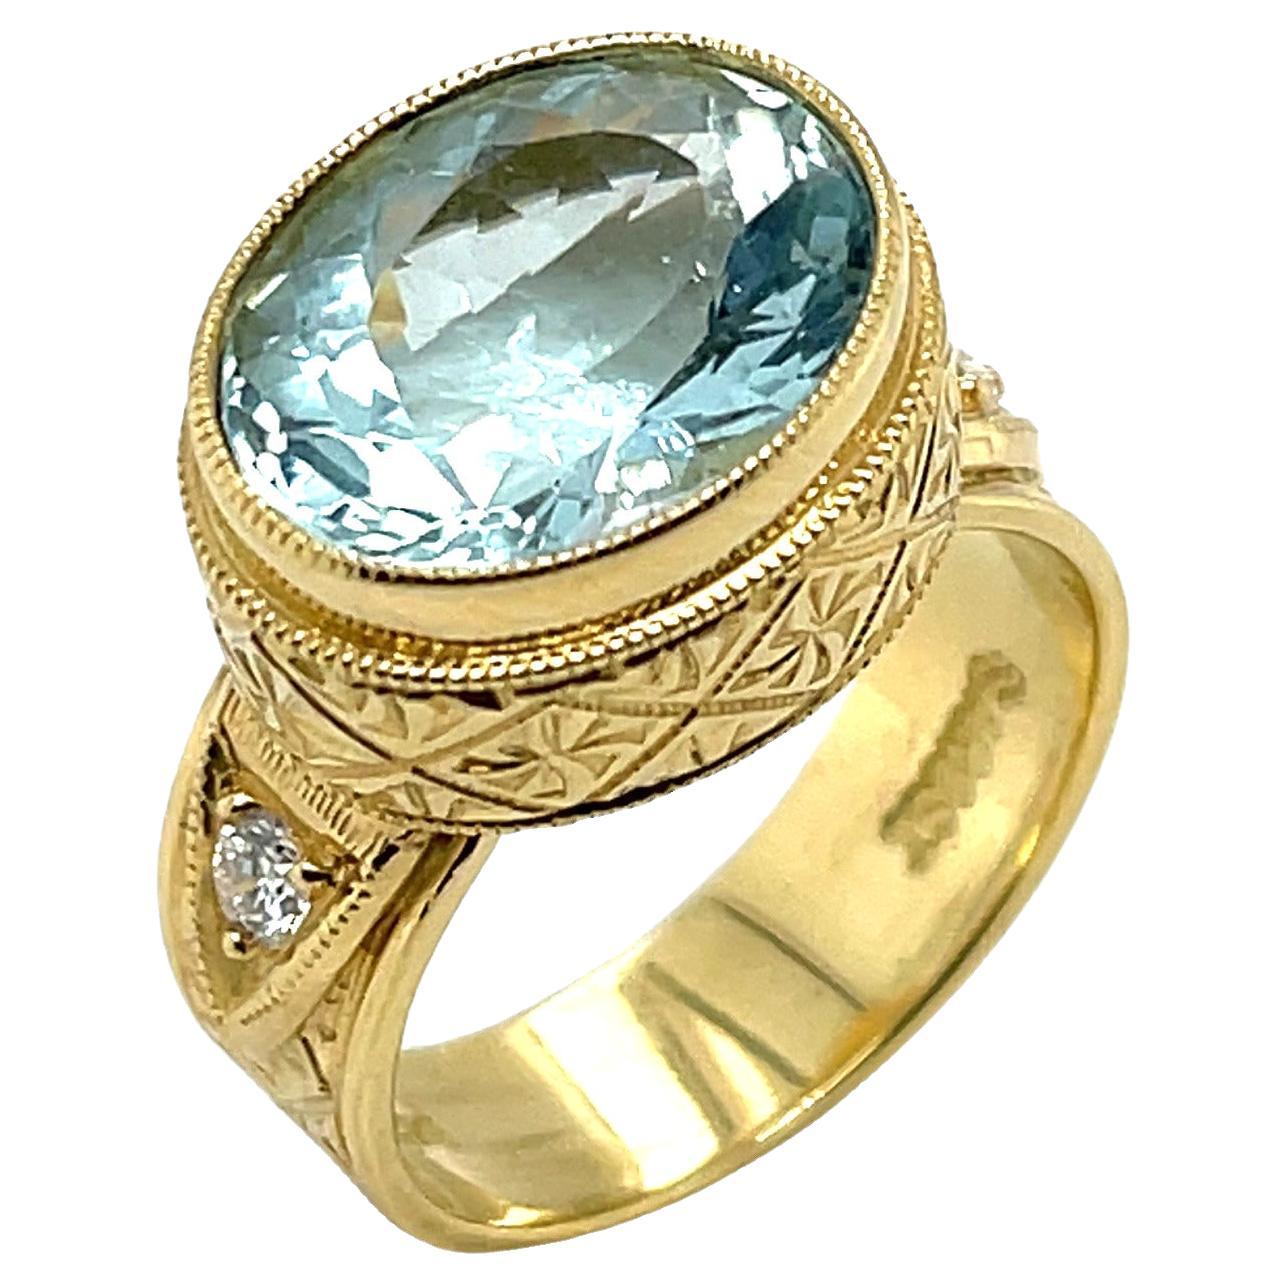 Aquamarine and Diamond Band Ring in 18k Yellow Gold, 5.17 Carats For Sale